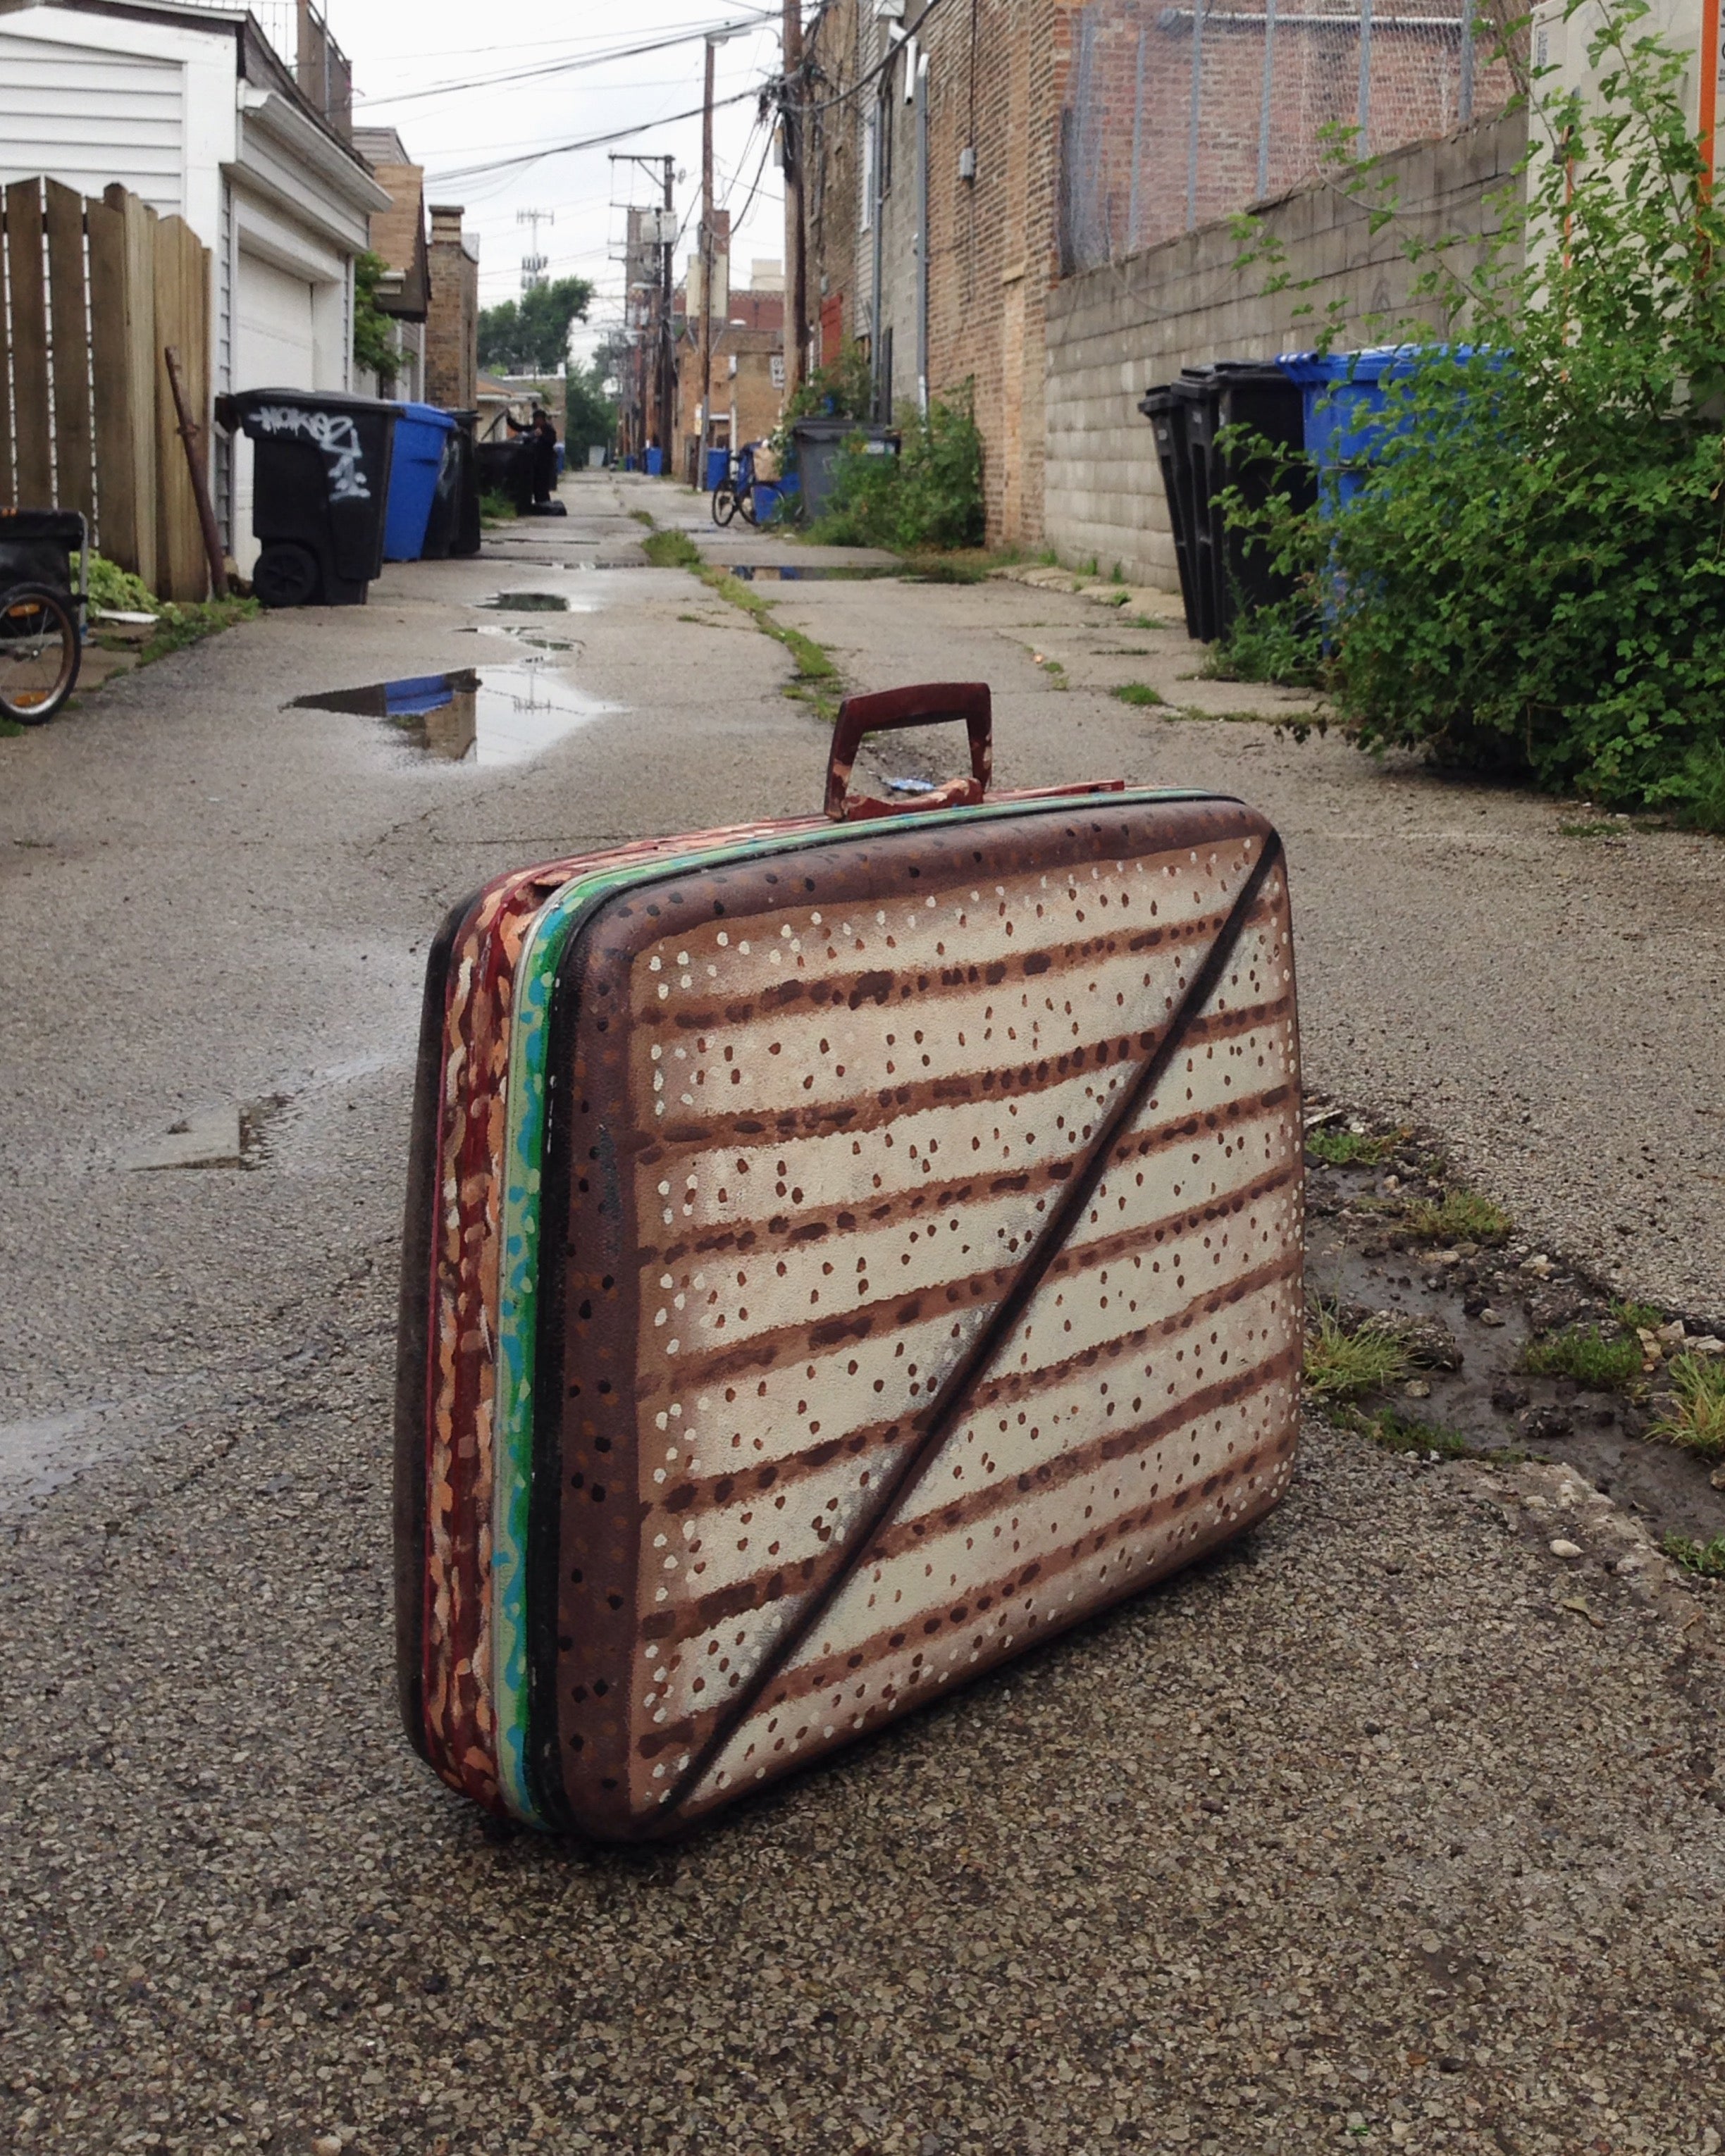 "Sandwich Suitcase" by Sick Fisher